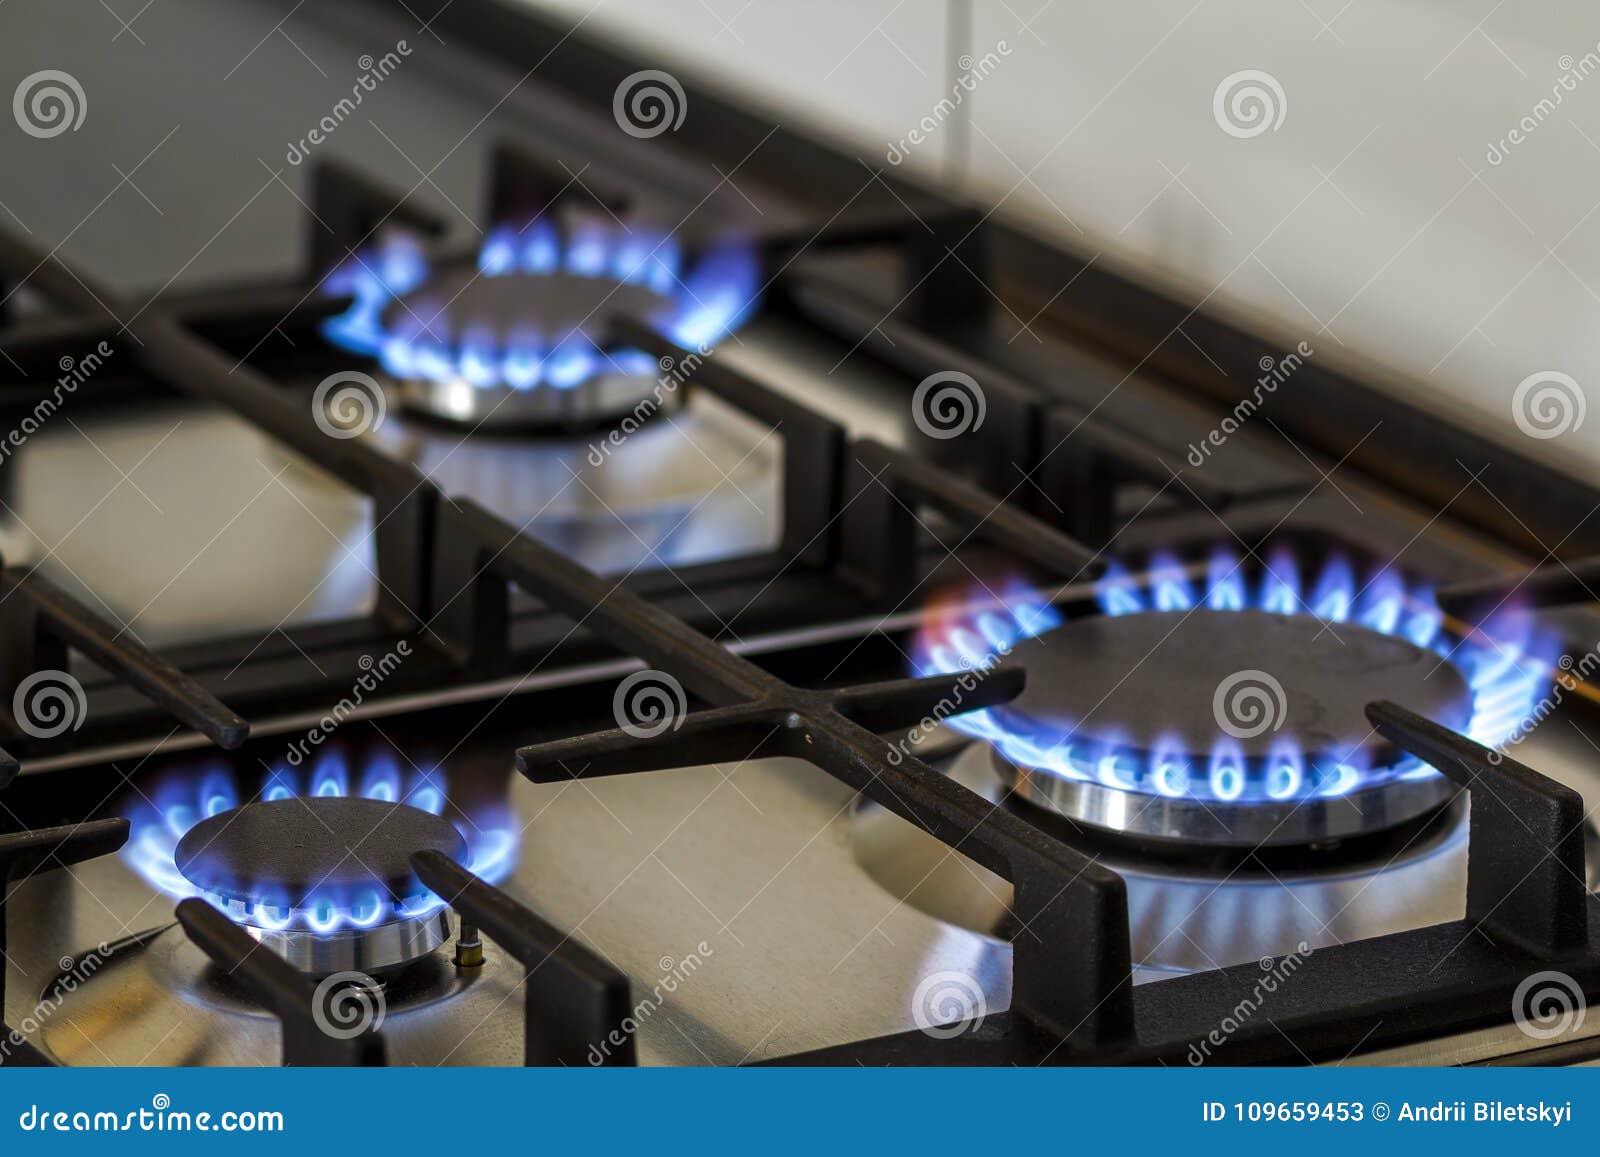 View of Gas Stove Burner Ring Stock Photo - Image of macro, indoor:  169079344